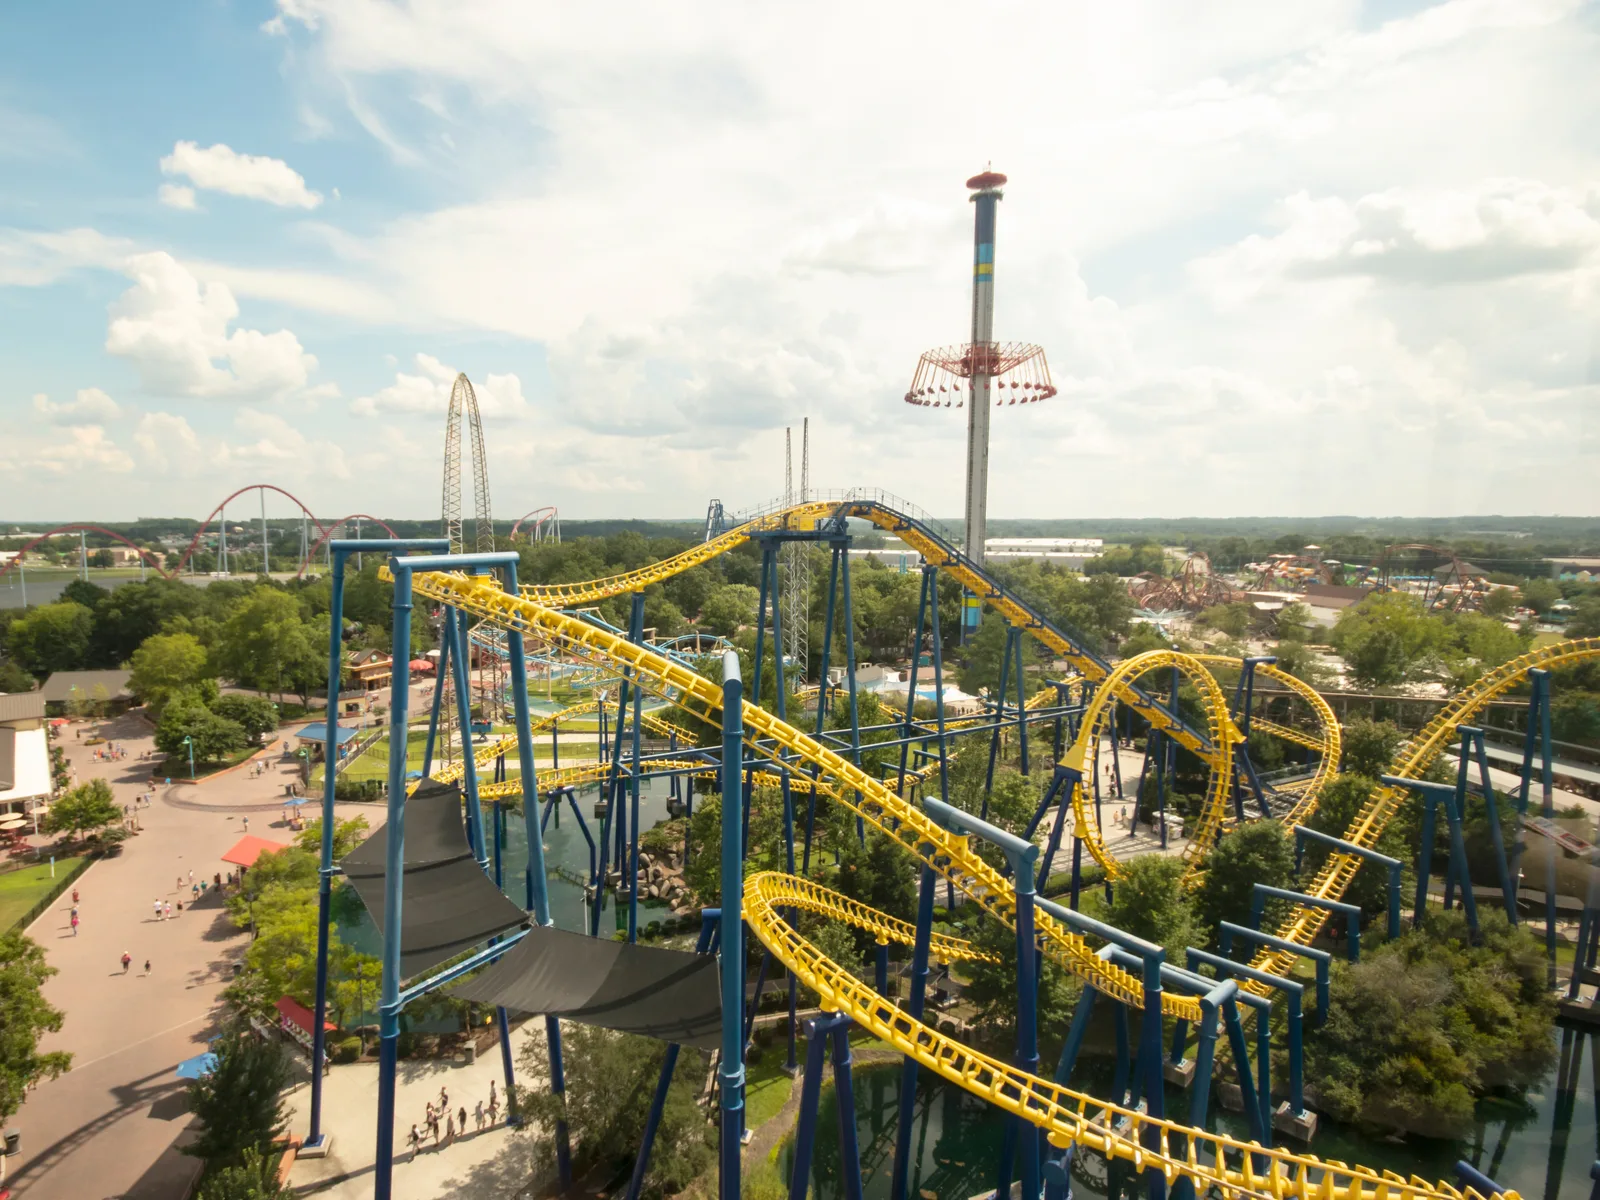 a long roller coaster with yellow tracks and a tall drop tower visible from a stunning aerial view of carowinds, one of the best things to do in charlotte, nc